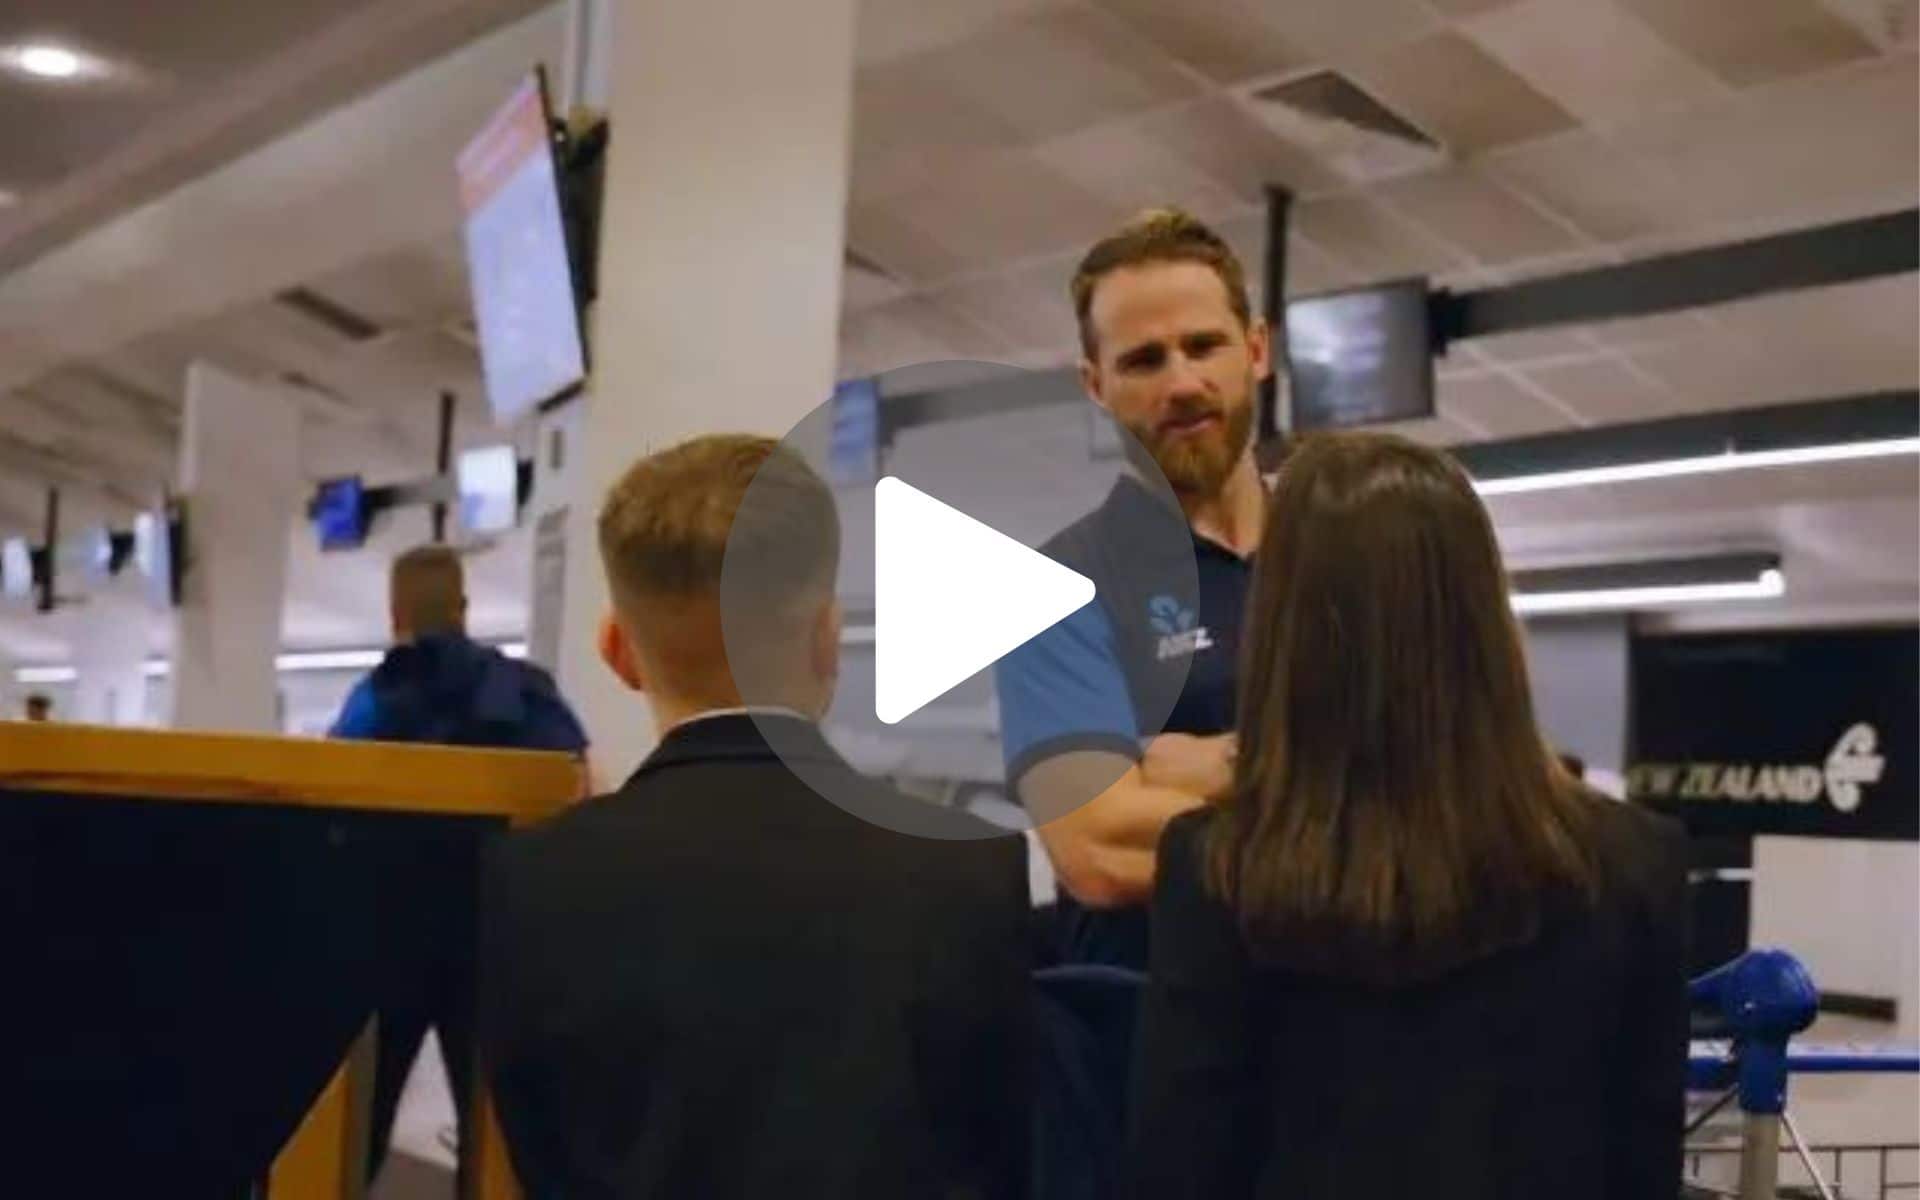 [Watch] 'Can We Come' - Iconic NZ Child Stars Win Hearts At Airport During NZ's Departure For T20 World Cup